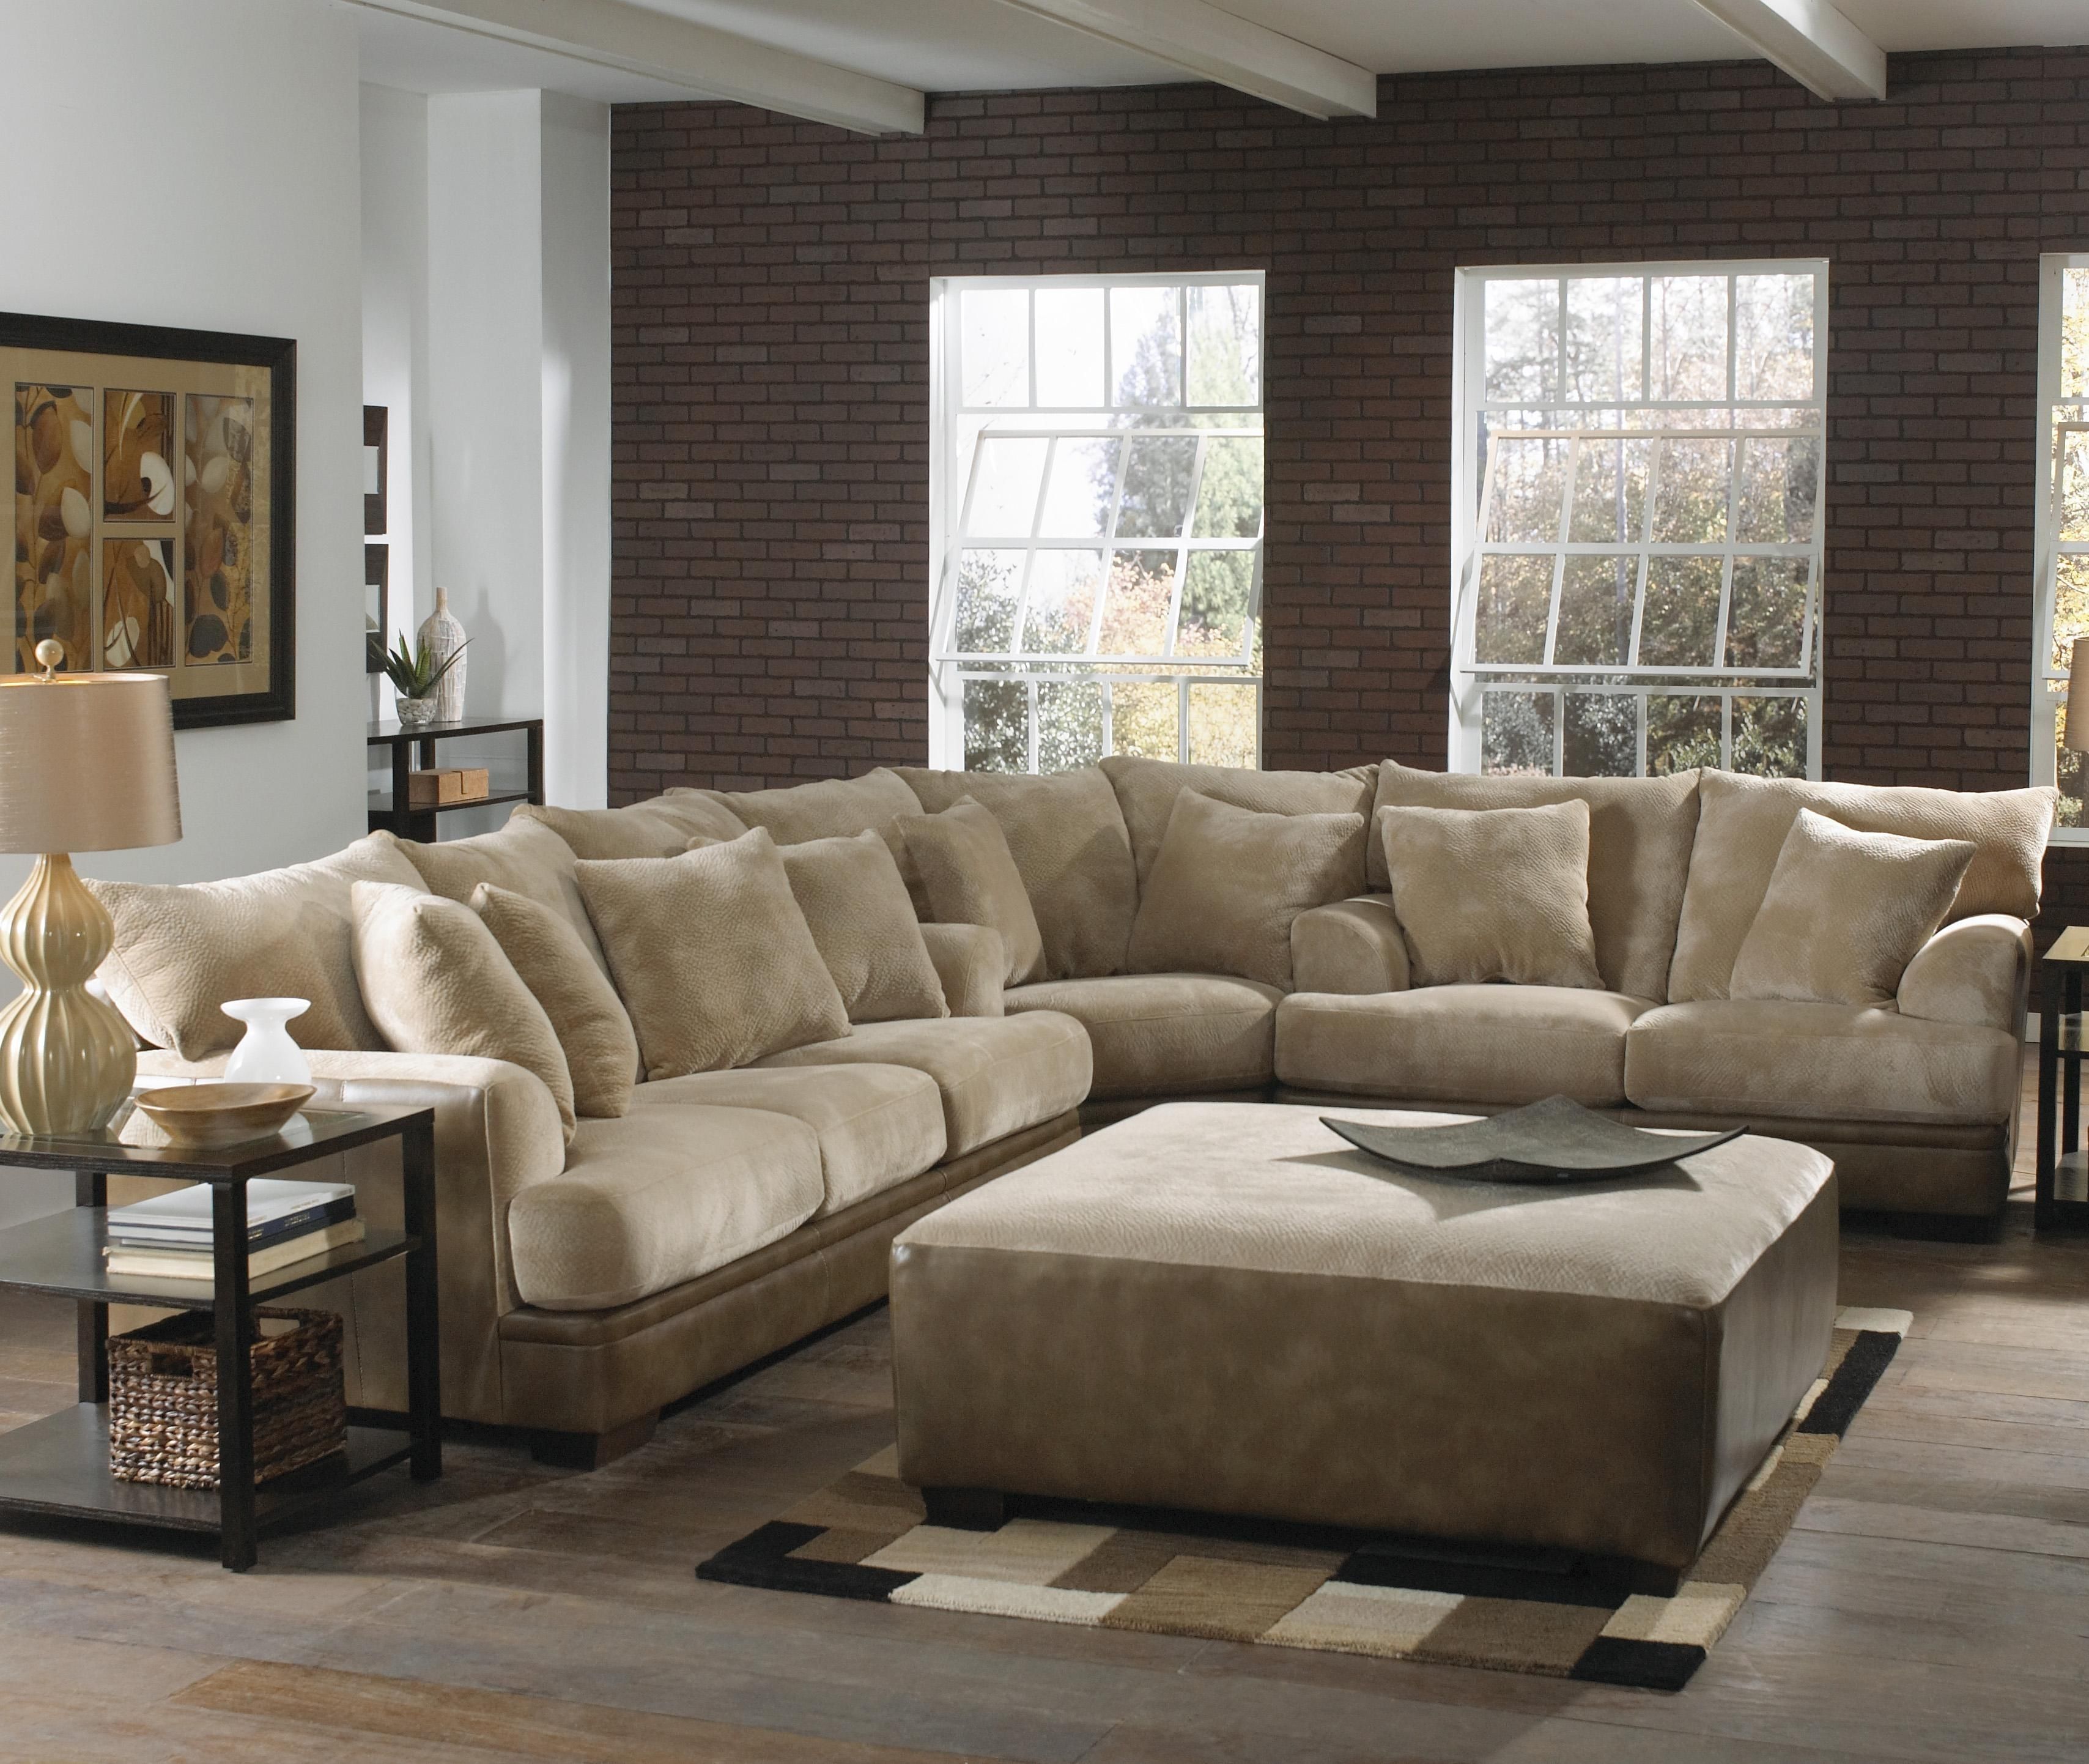 Pinsofascouch On Living Room Sofa | Pinterest | Sofa, Furniture In Norfolk Chocolate 3 Piece Sectionals With Raf Chaise (View 18 of 30)